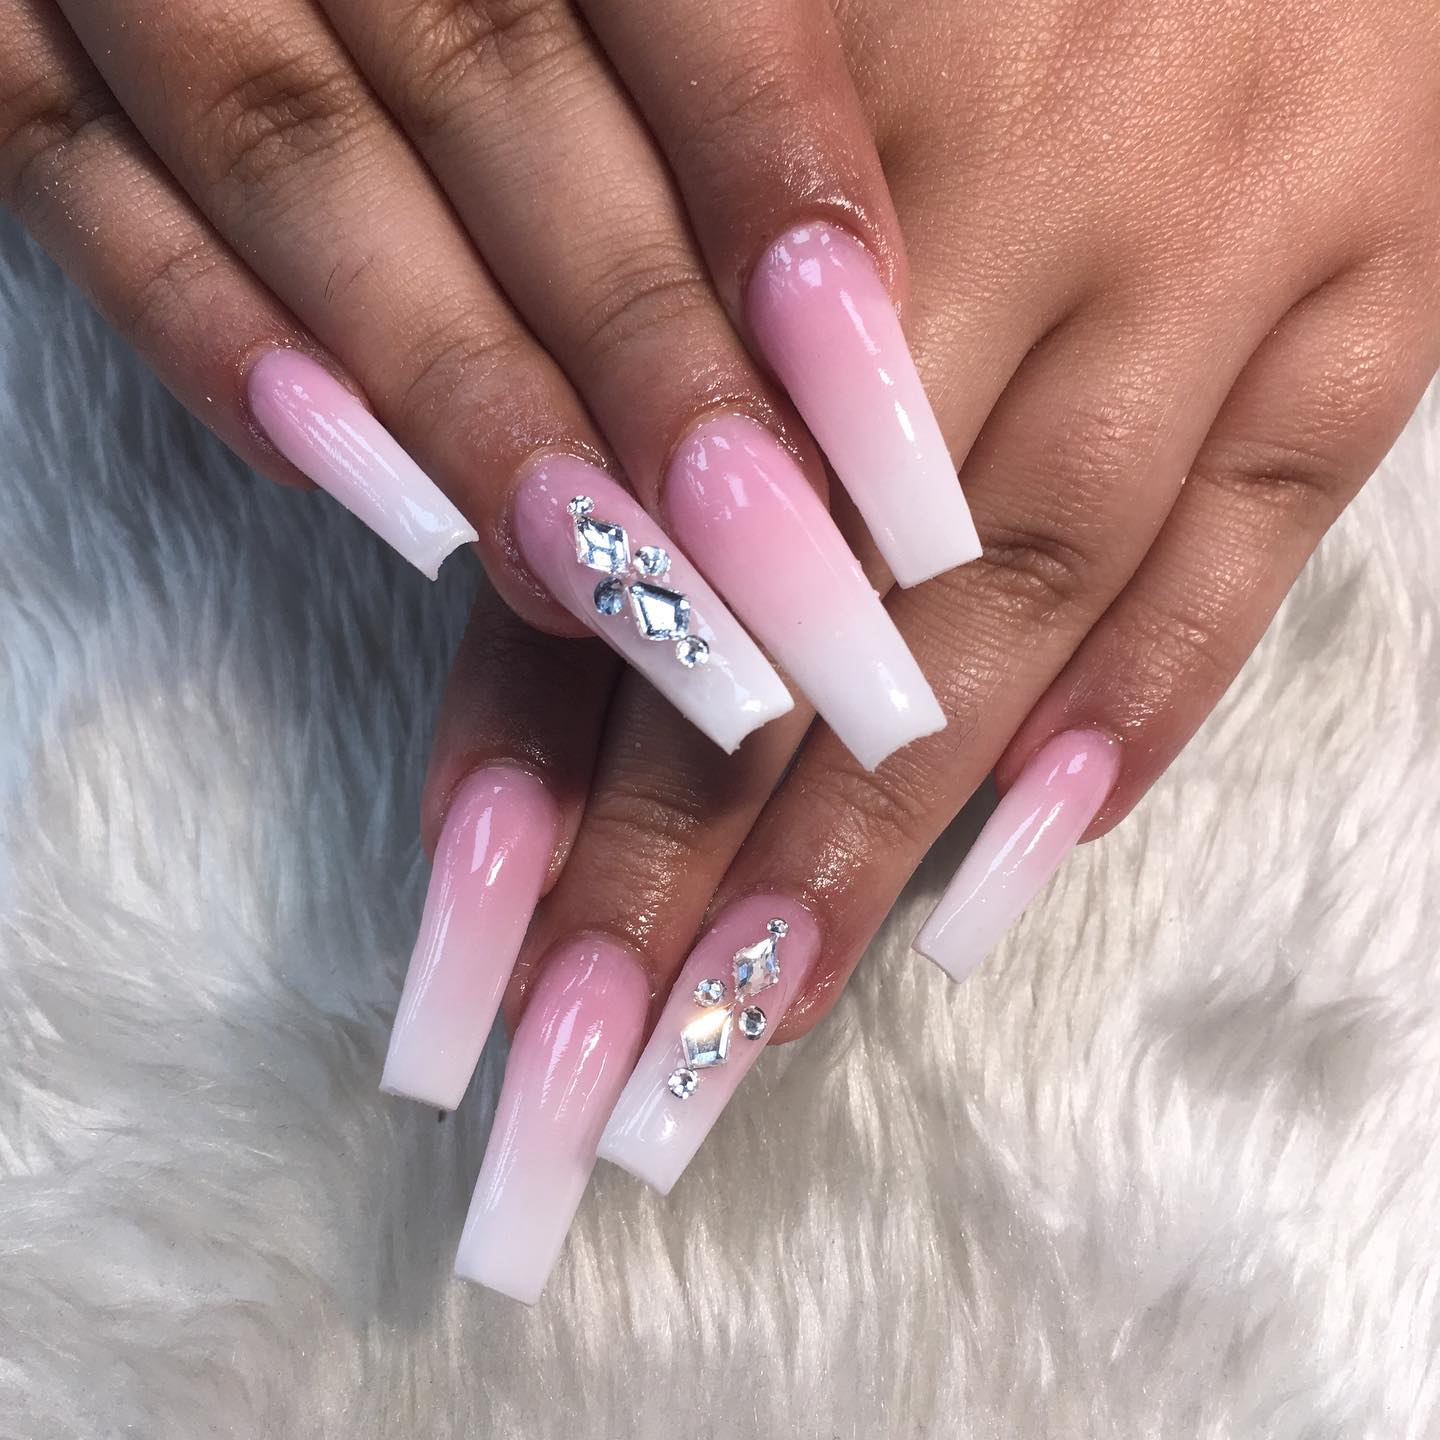 Gems are always there for us to decorate our nails and let them shine with a final touch. Big size of gems are quite bold and amazing, so why don't you apply them for your ombre nails?